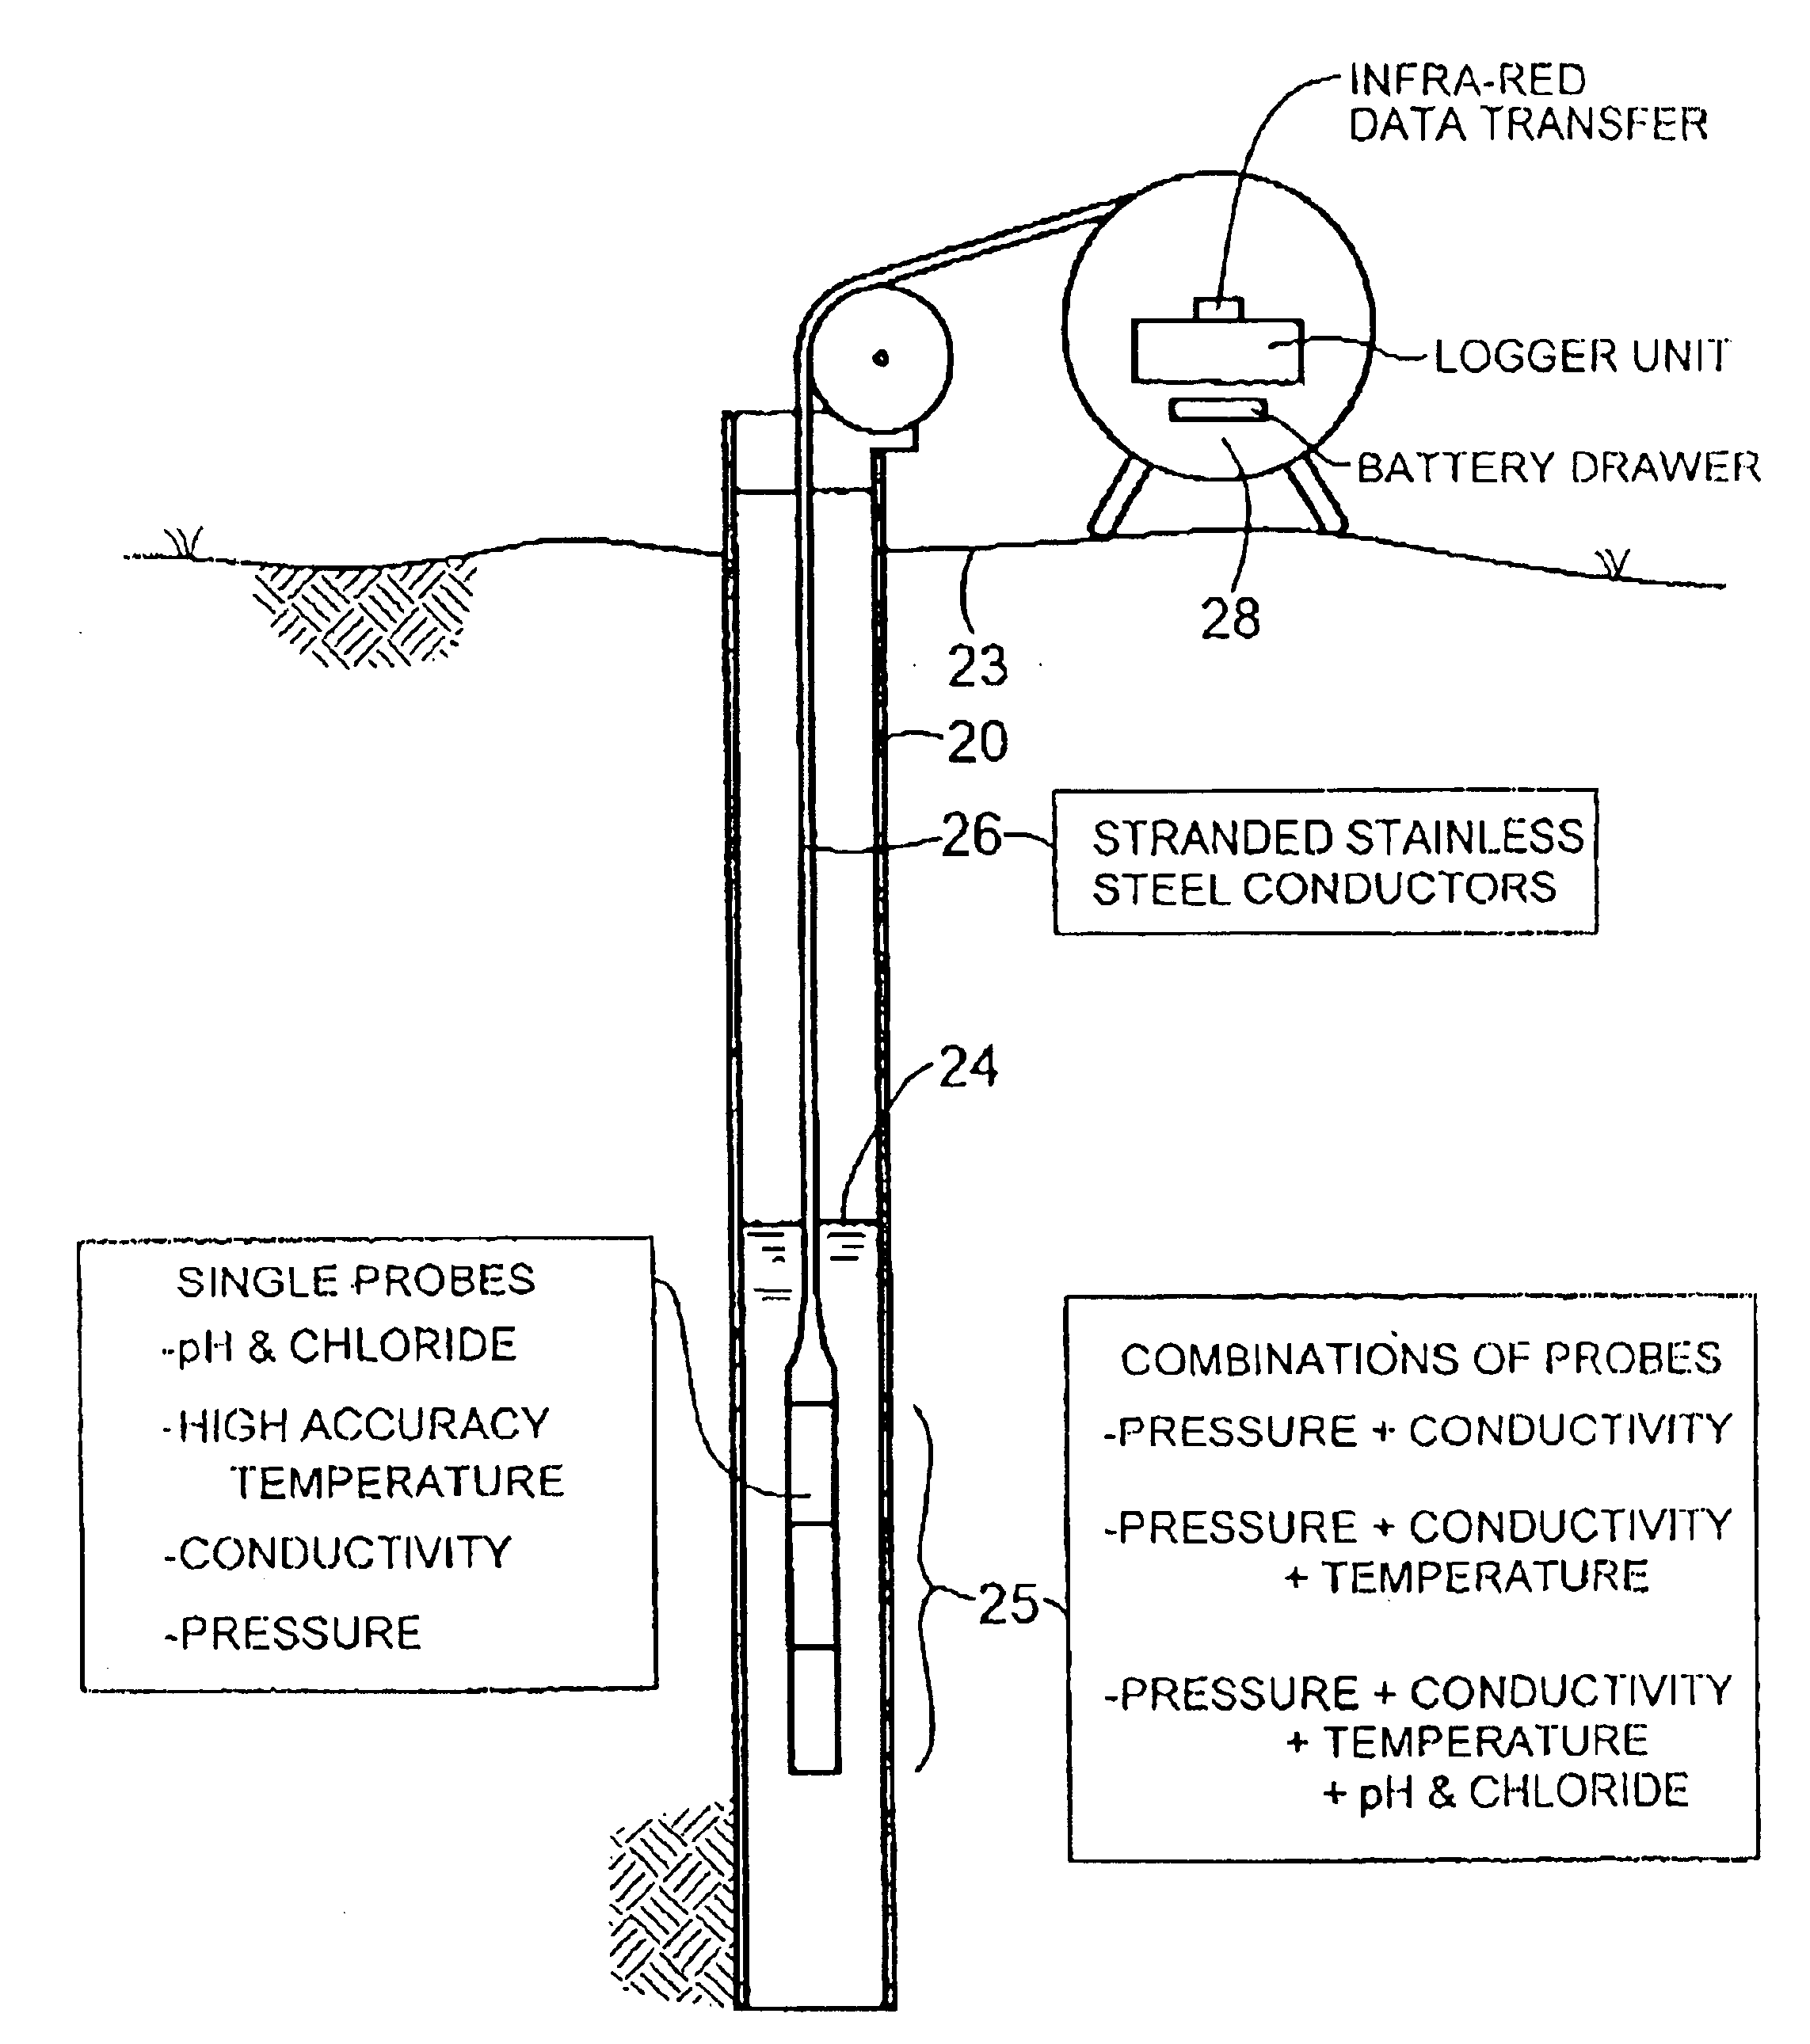 Apparatus for measuring and recording data from boreholes